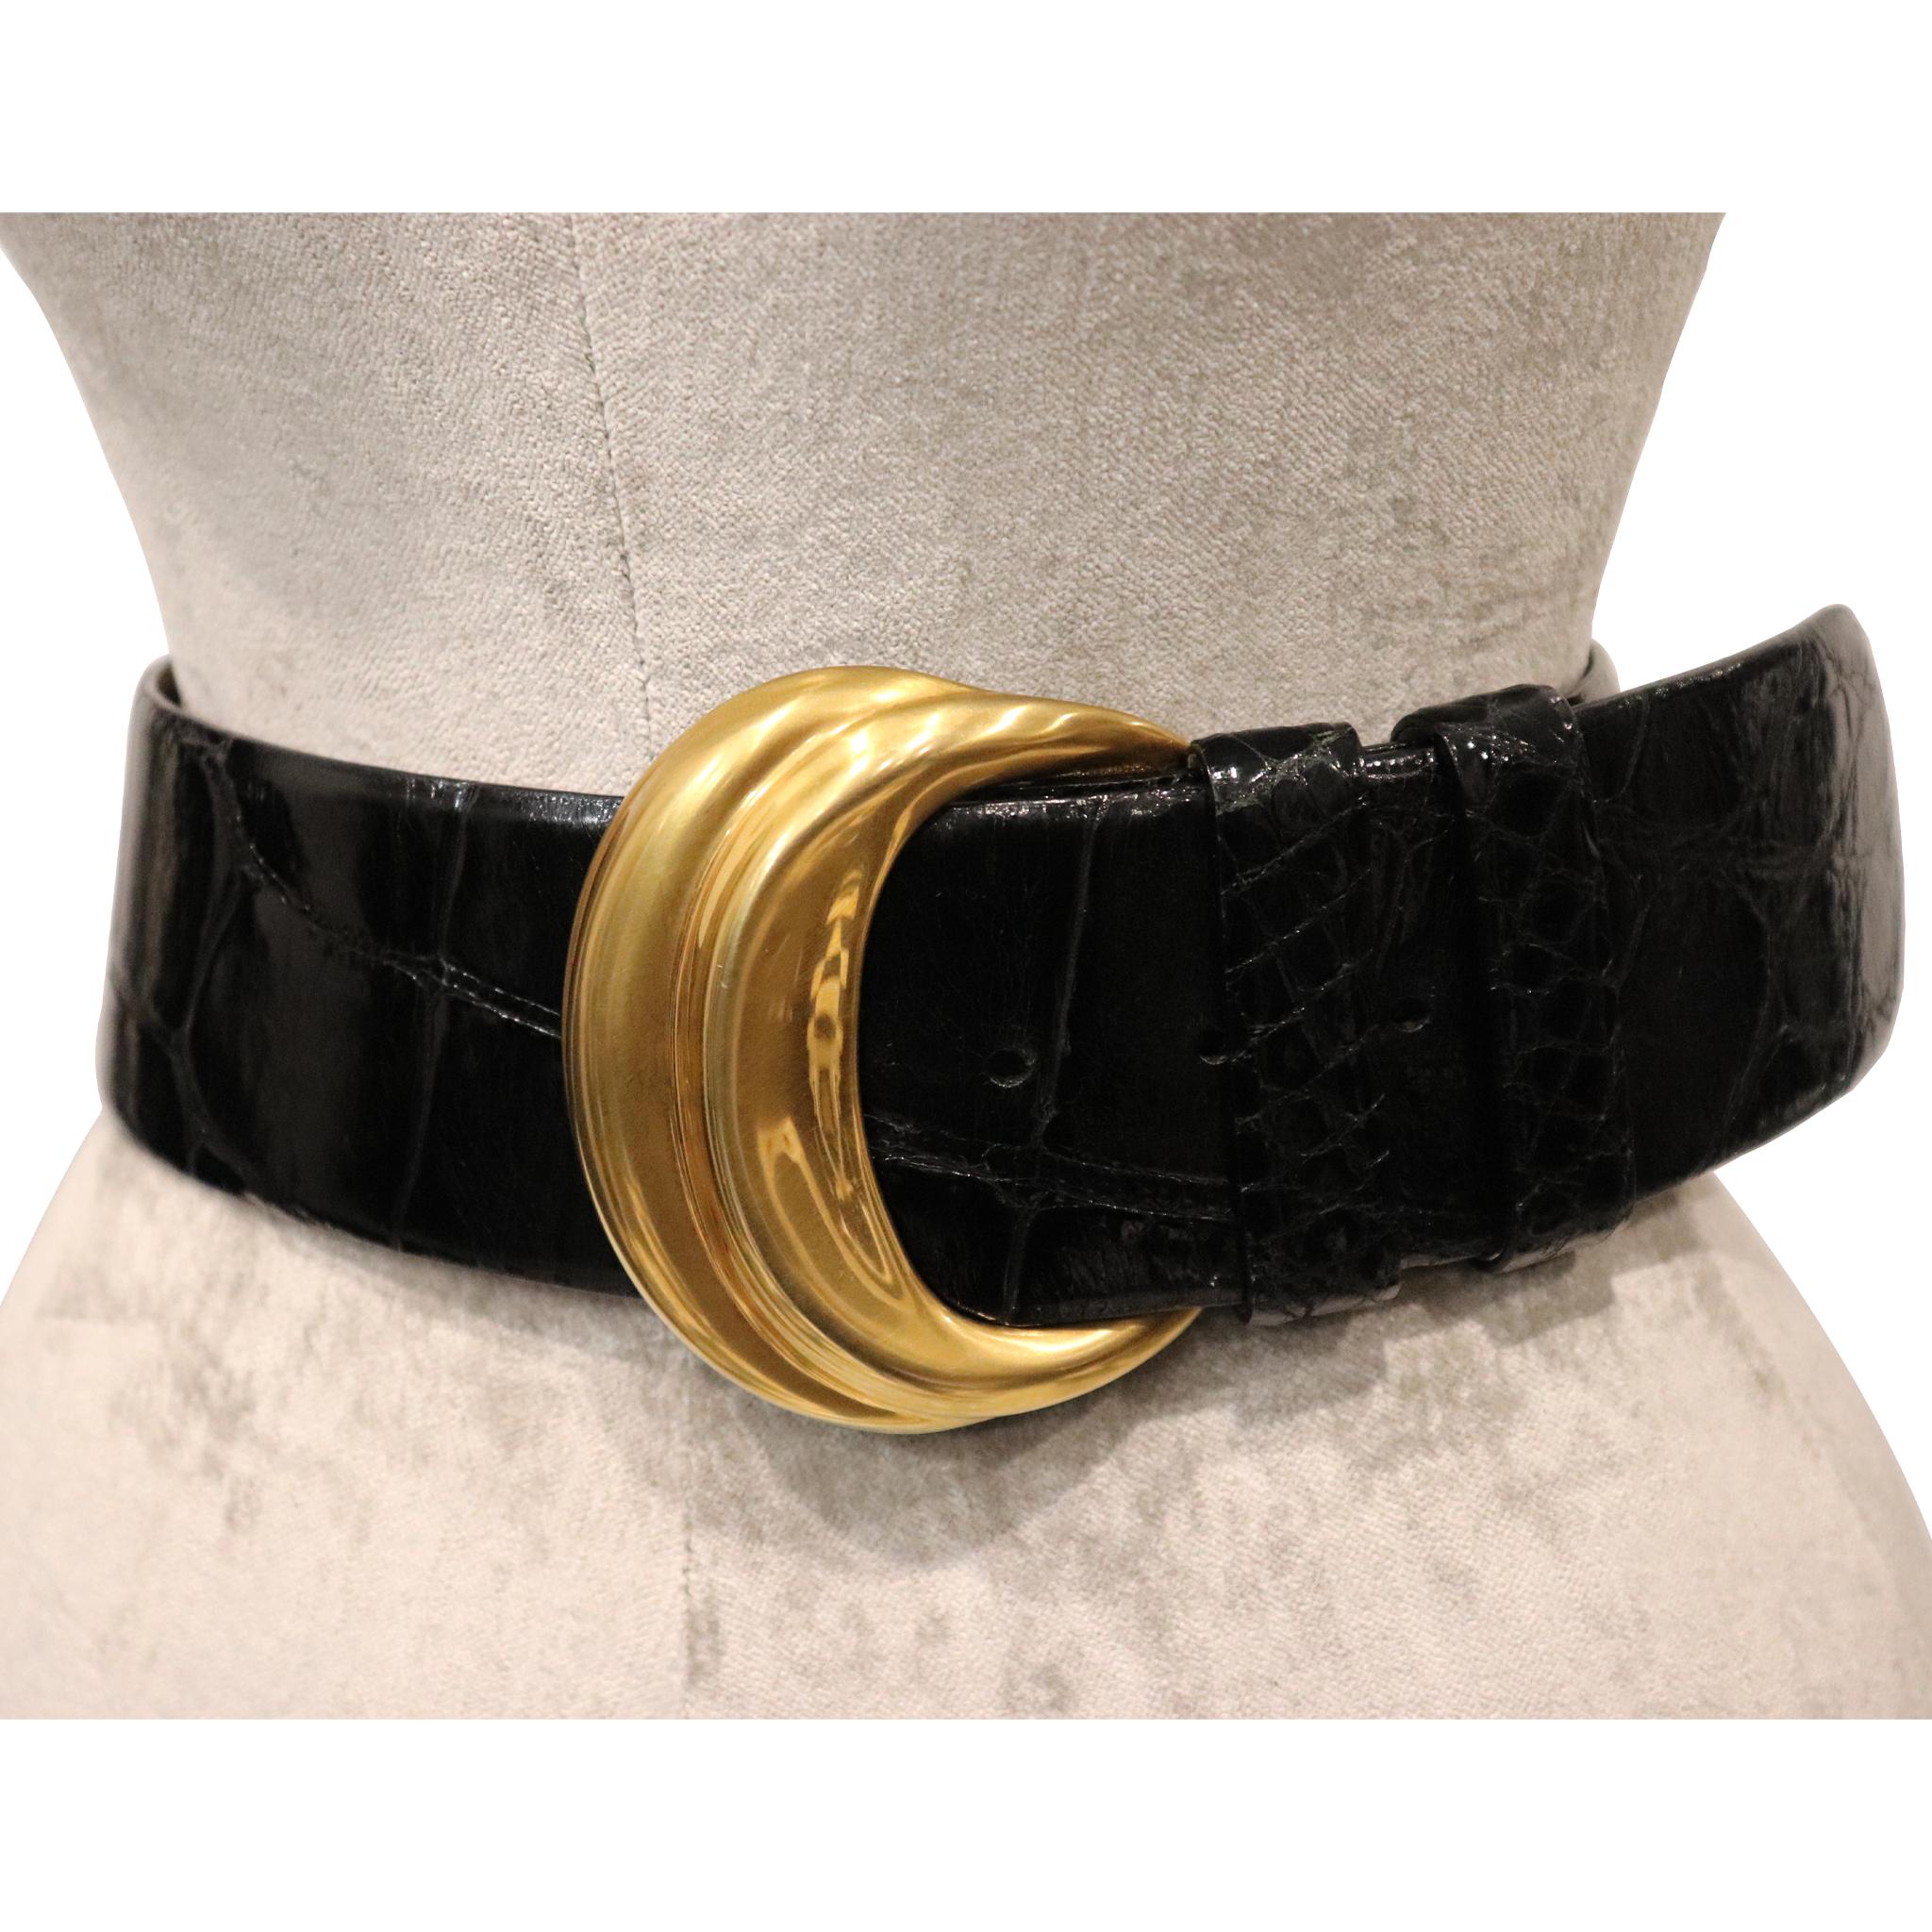 Donna Karan Alligator Belt W/ Gold Buckle Size Small. Vintage belt from 1990s in excellent condition 

Measurements: 

Longest Length - 32 inches 
Shortest Length- 30.8 inches 
Height - 2.5 inches